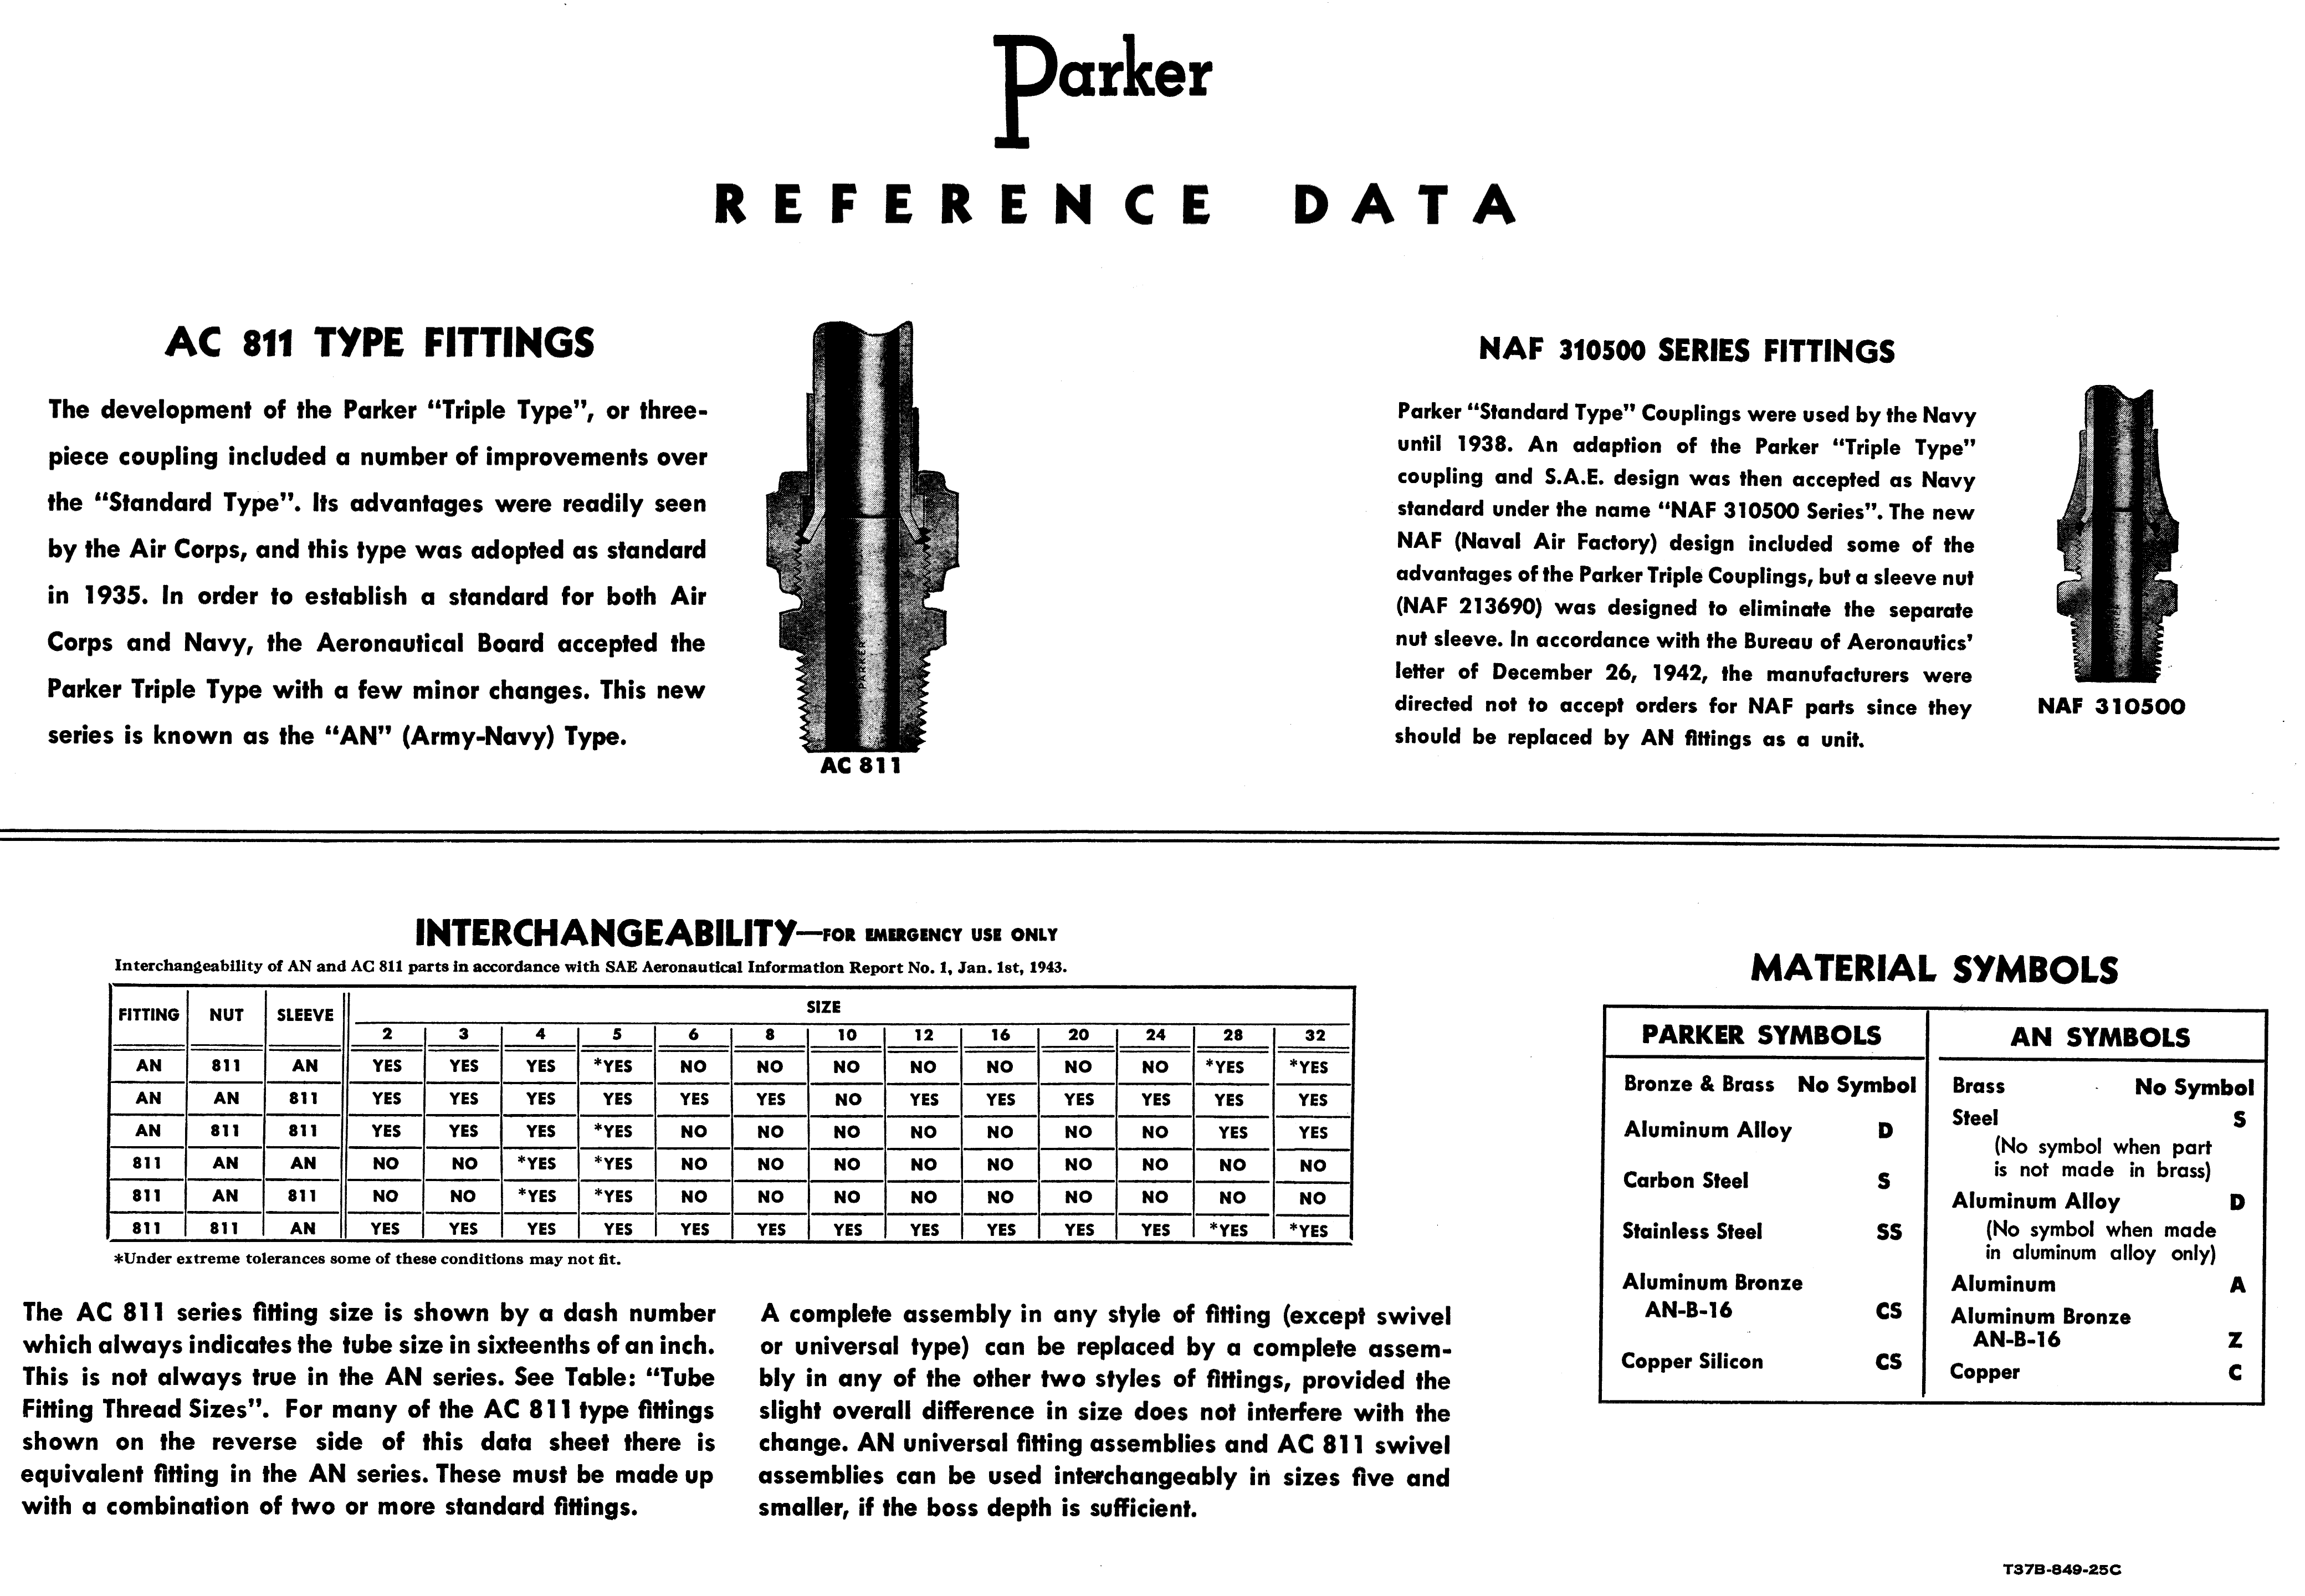 Sample page 2 from AirCorps Library document: Parker Reference Data